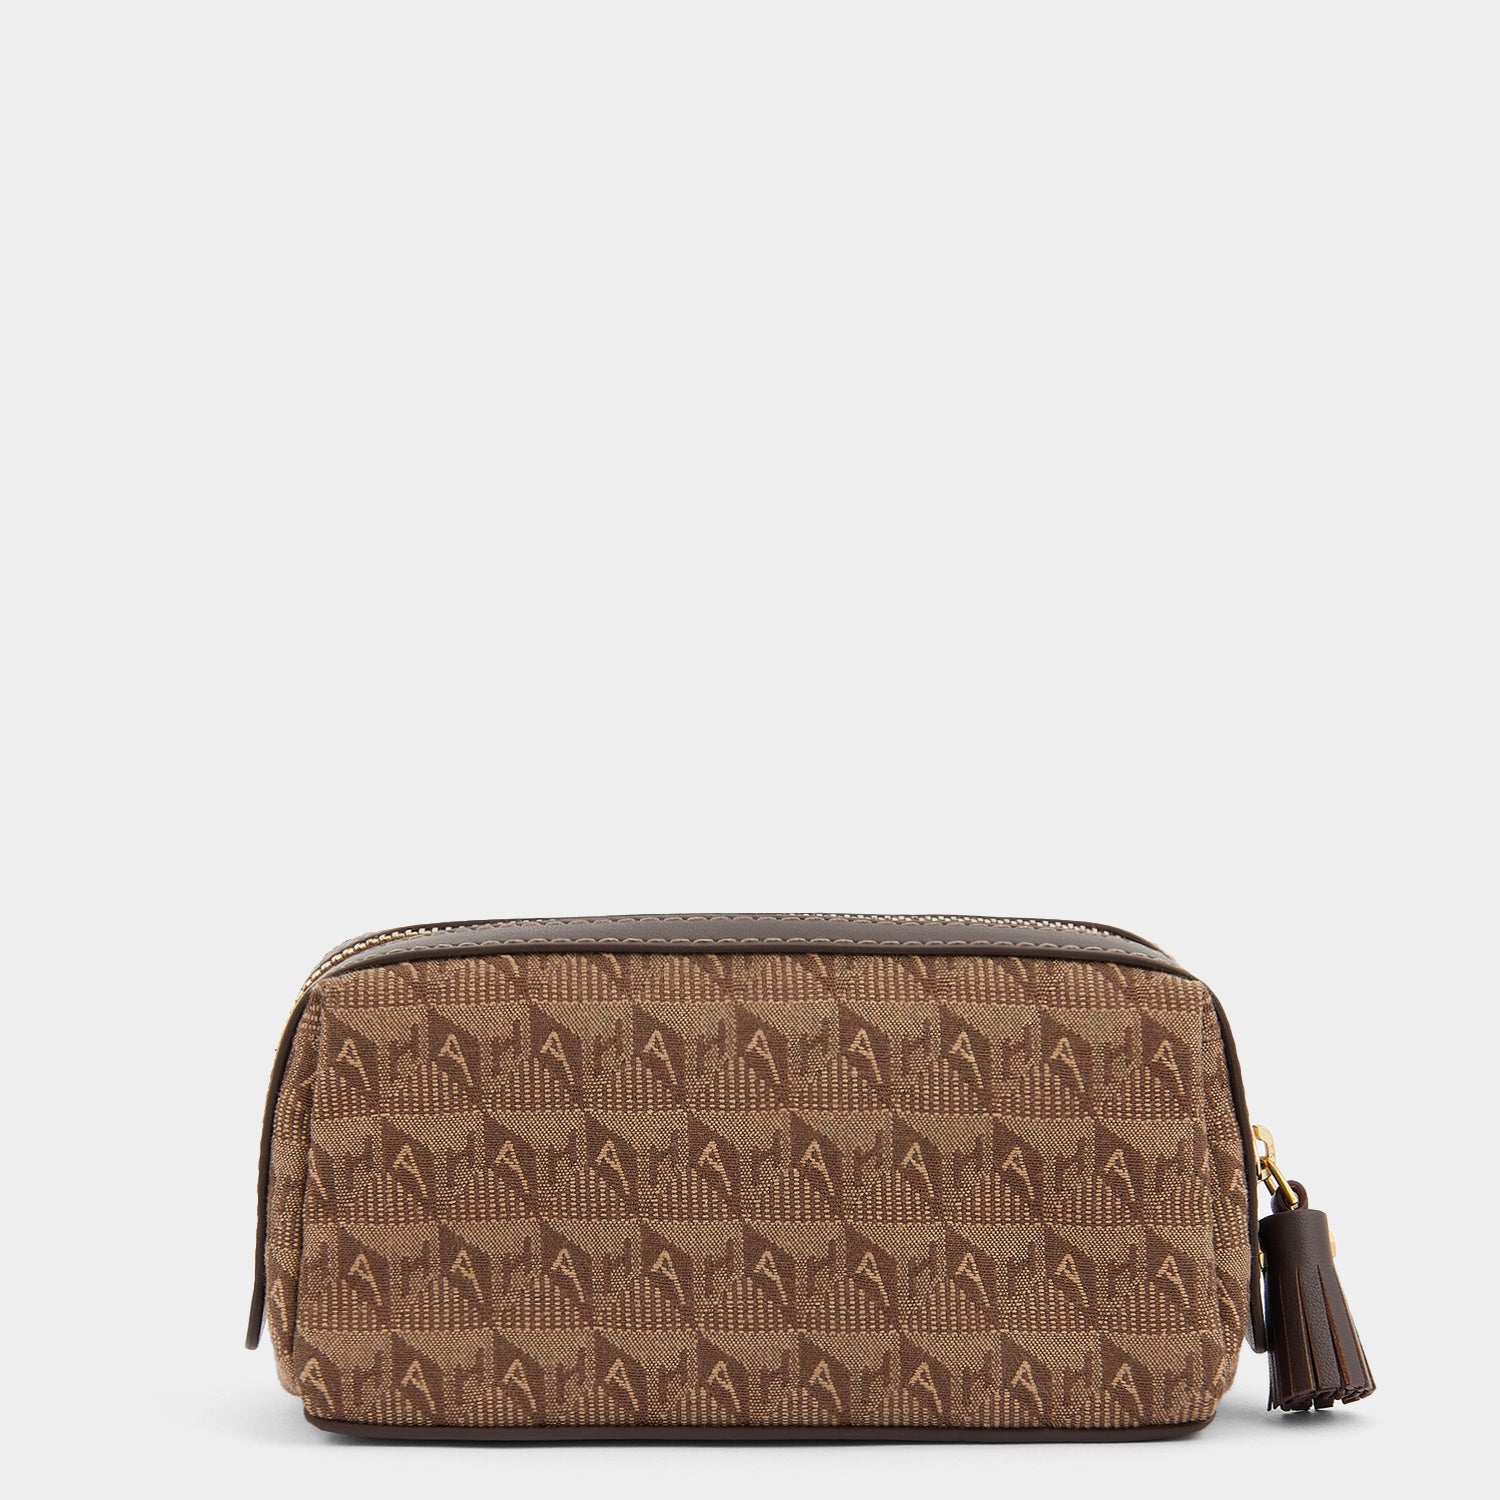 Jacquard Girlie Stuff Pouch -

                  
                    Jacquard in Dark Earth -
                  

                  Anya Hindmarch US
